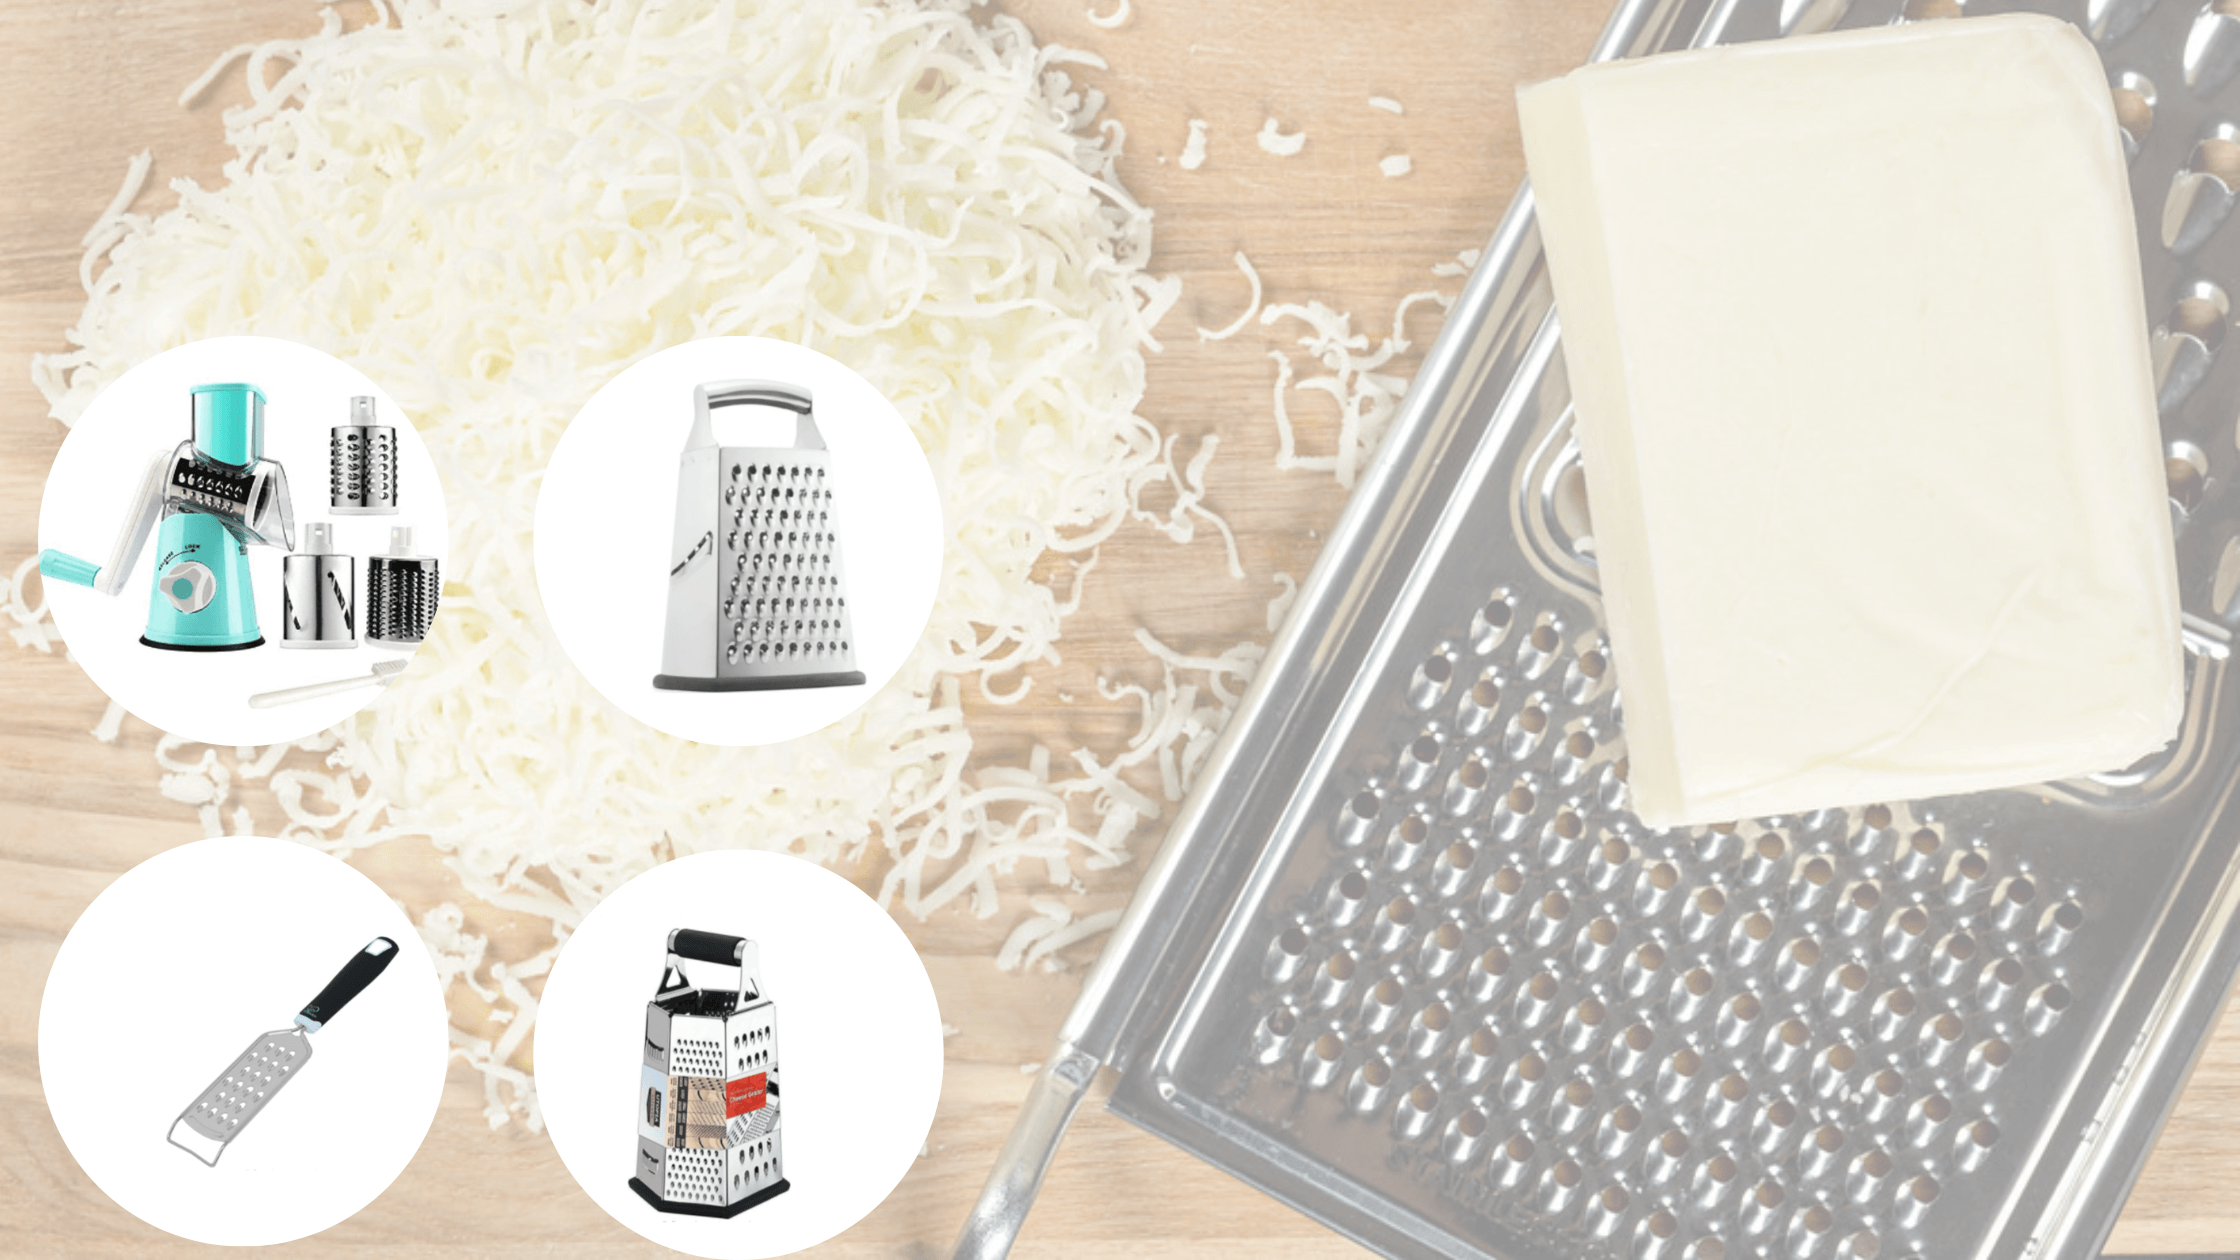 Different Types Of Mozzarella Cheese Shredders